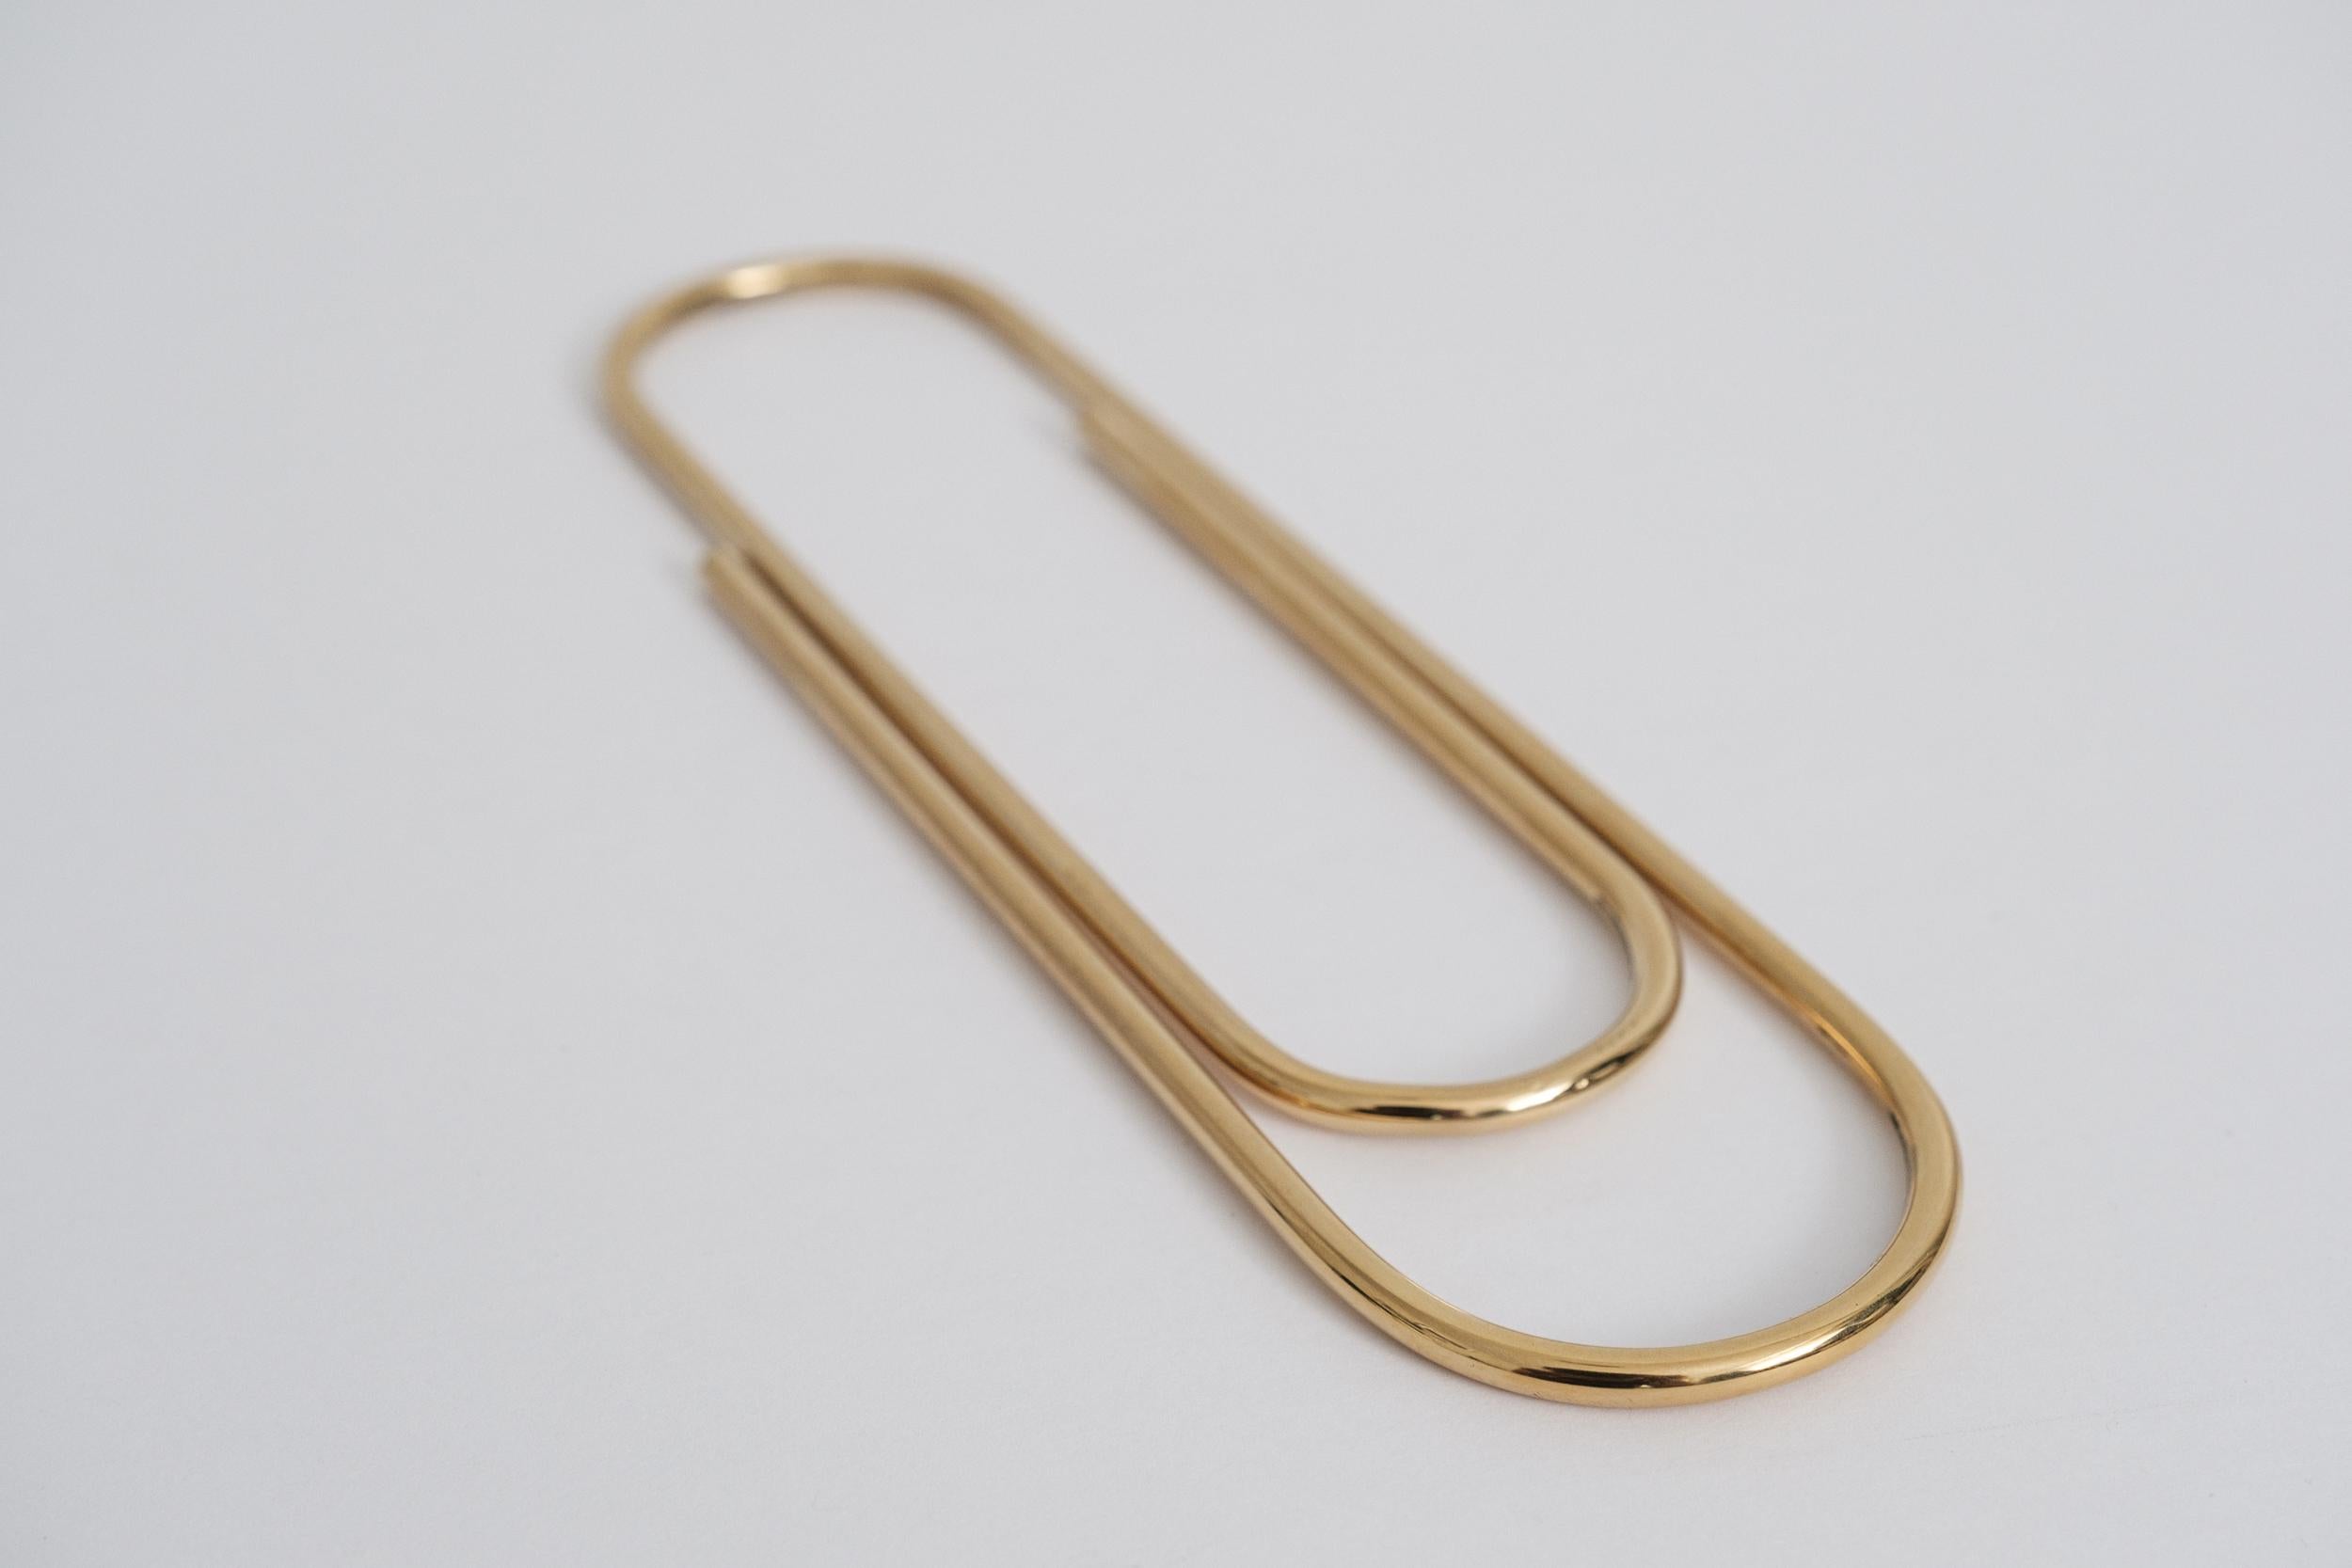 Large Carl Auböck Model #4751 'Paperclip' Brass Paperweight For Sale 8